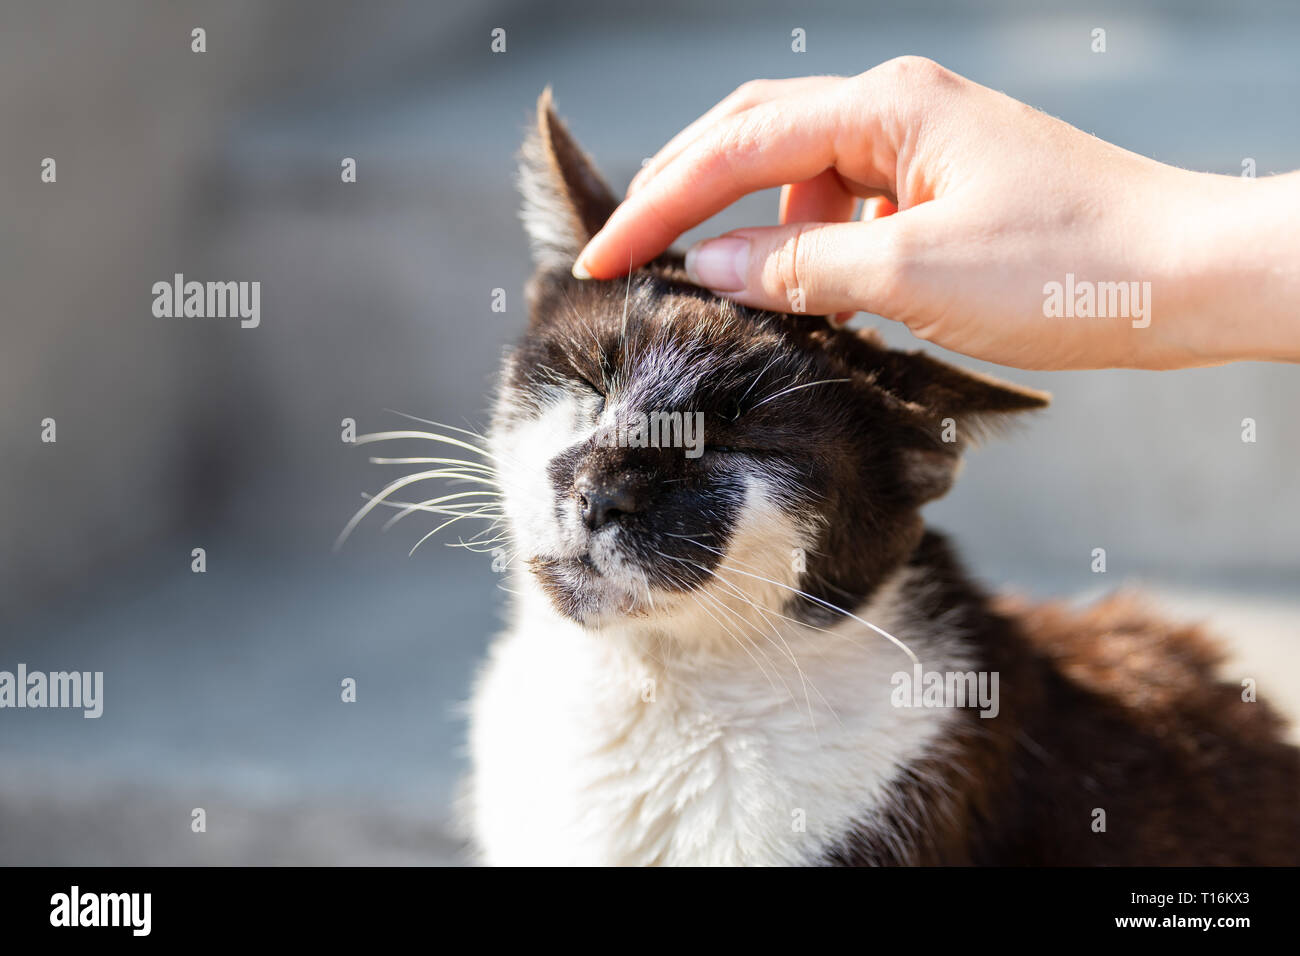 Hand petting rubbing head of stray cat companion pet happy smiling affection bonding face expression cute adorable kitty with closed eyes by steps on  Stock Photo